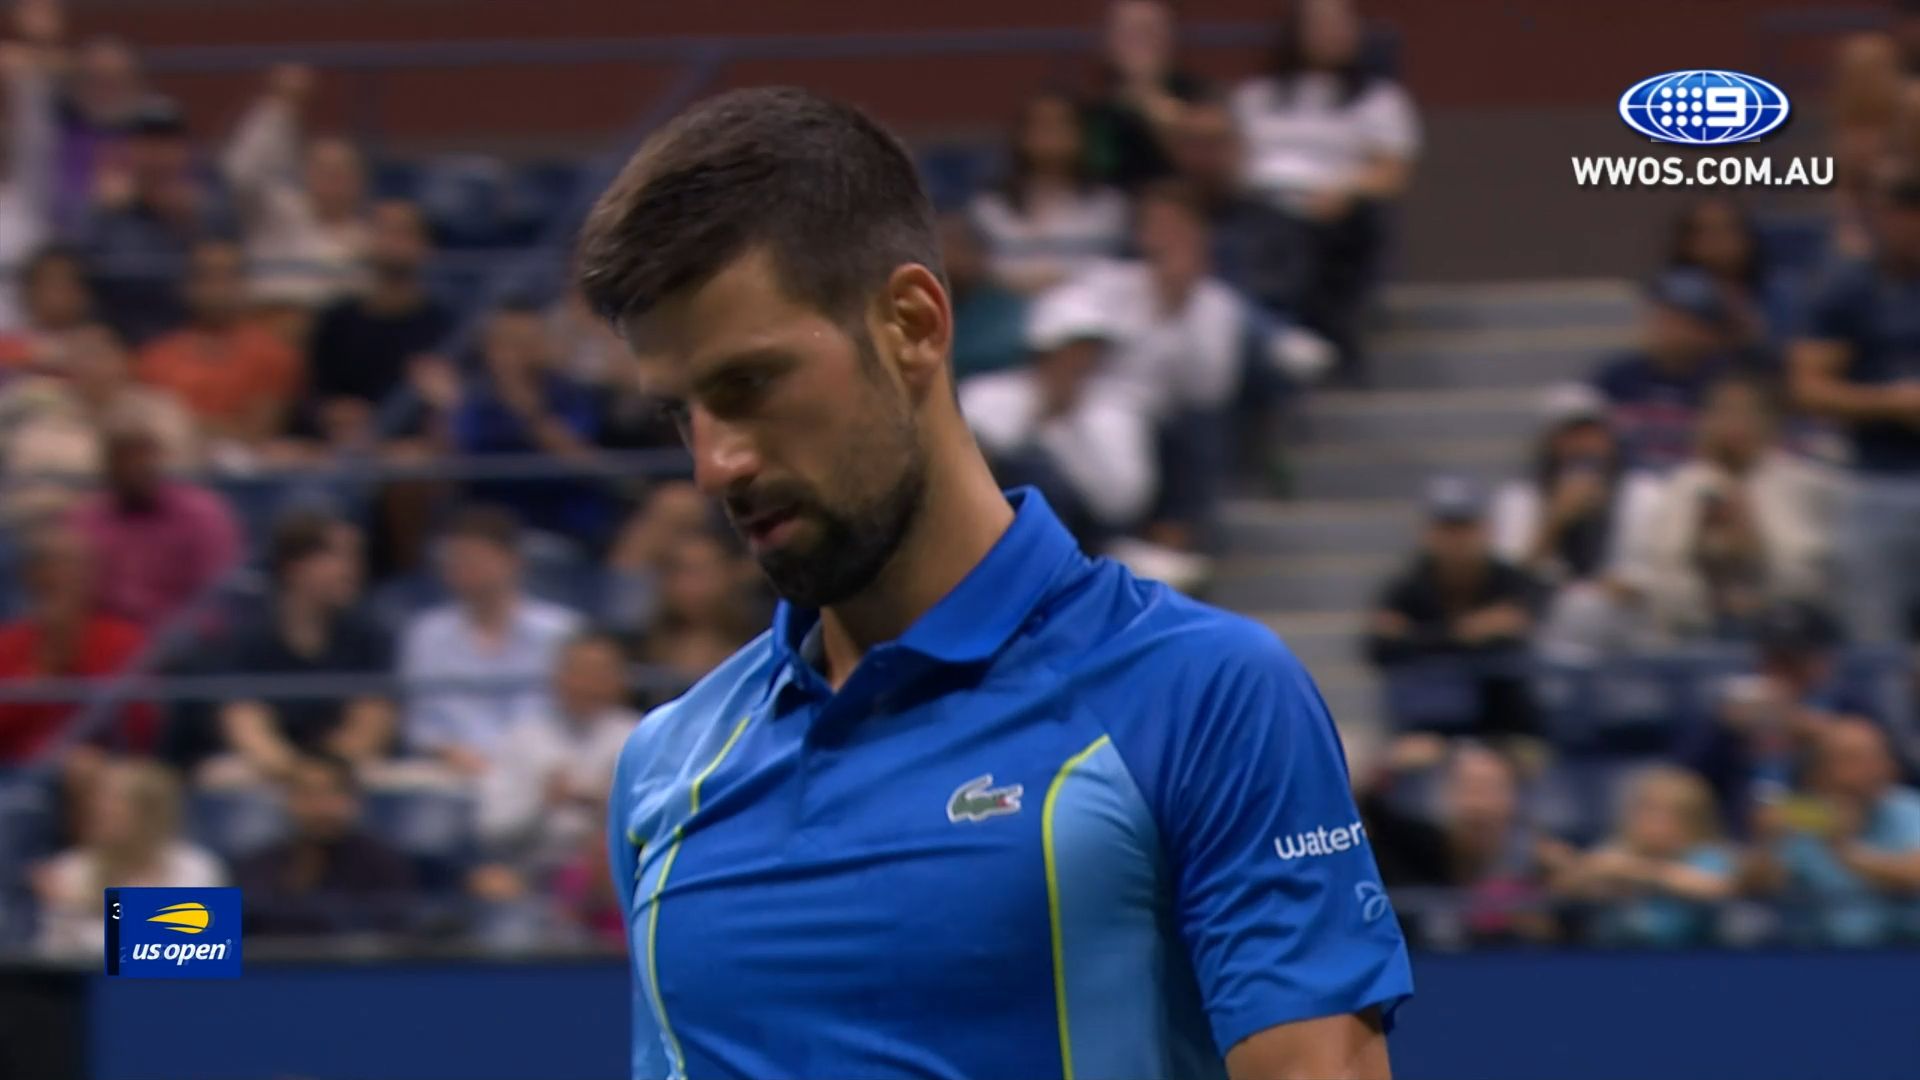 Novak Djokovic comes back after dropping the first two sets to beat Laslo Djere at the US Open